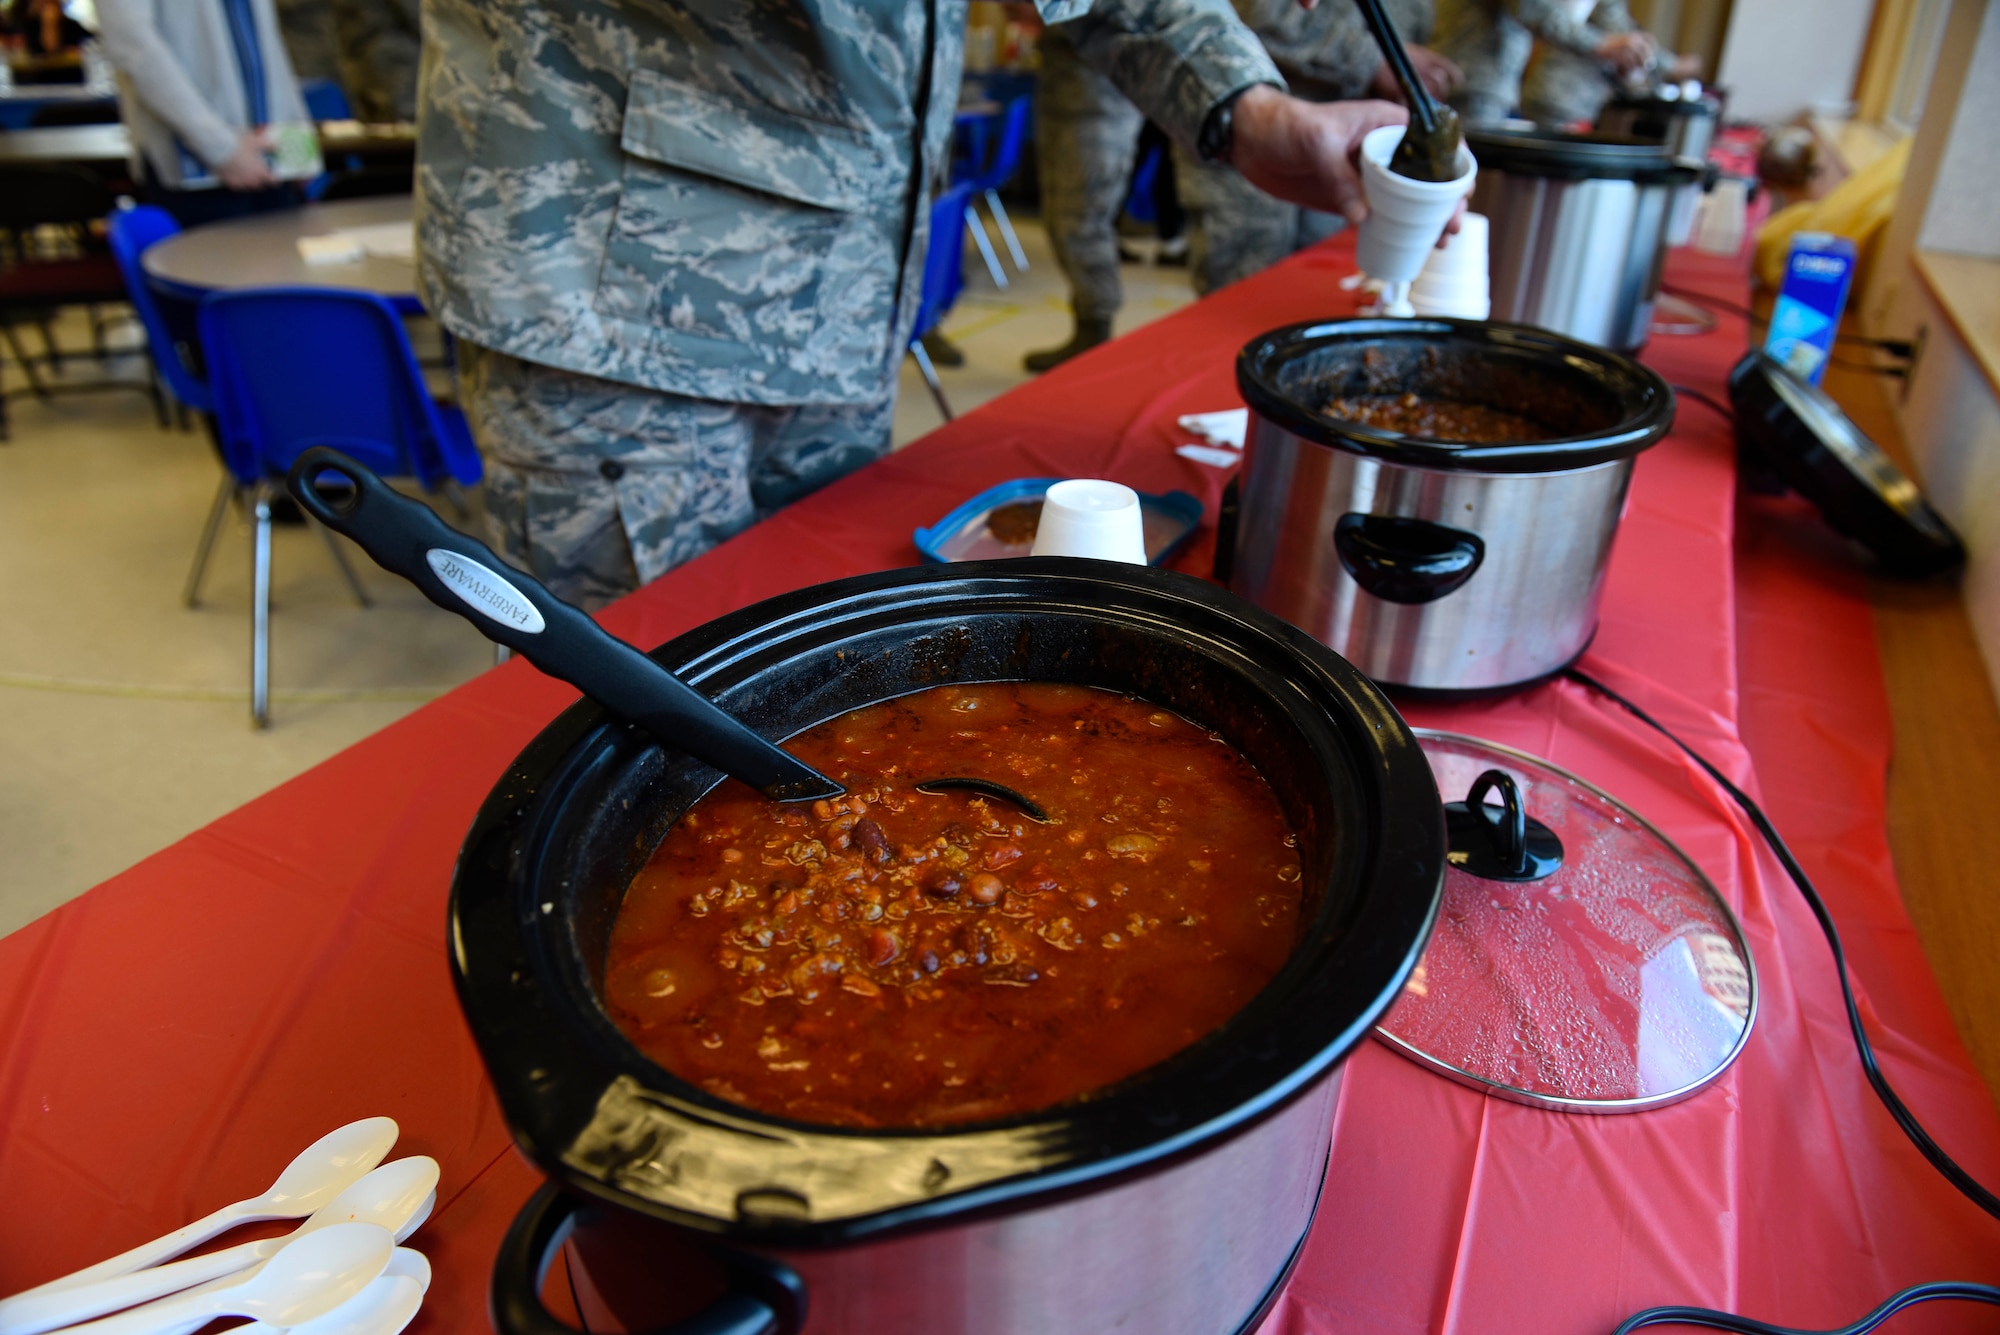 Slow cookers filled with chili simmer while Airmen prepare to taste and judge their favorite as part of a "Chili Cook-Off" promoting the 2018 Combined Federal Campaign Kick-Off at Fairchild Air Force Base, Washington, Oct. 24, 2018. The 92nd Air Refueling Wing CFC representatives host the campaign annually for a six-week period, ecouraging Airmen and their families to donate money or time to a charity or nonprofit organization of their choice. (U.S. Air Force photo/Airman 1st Class Lawrence Sena)